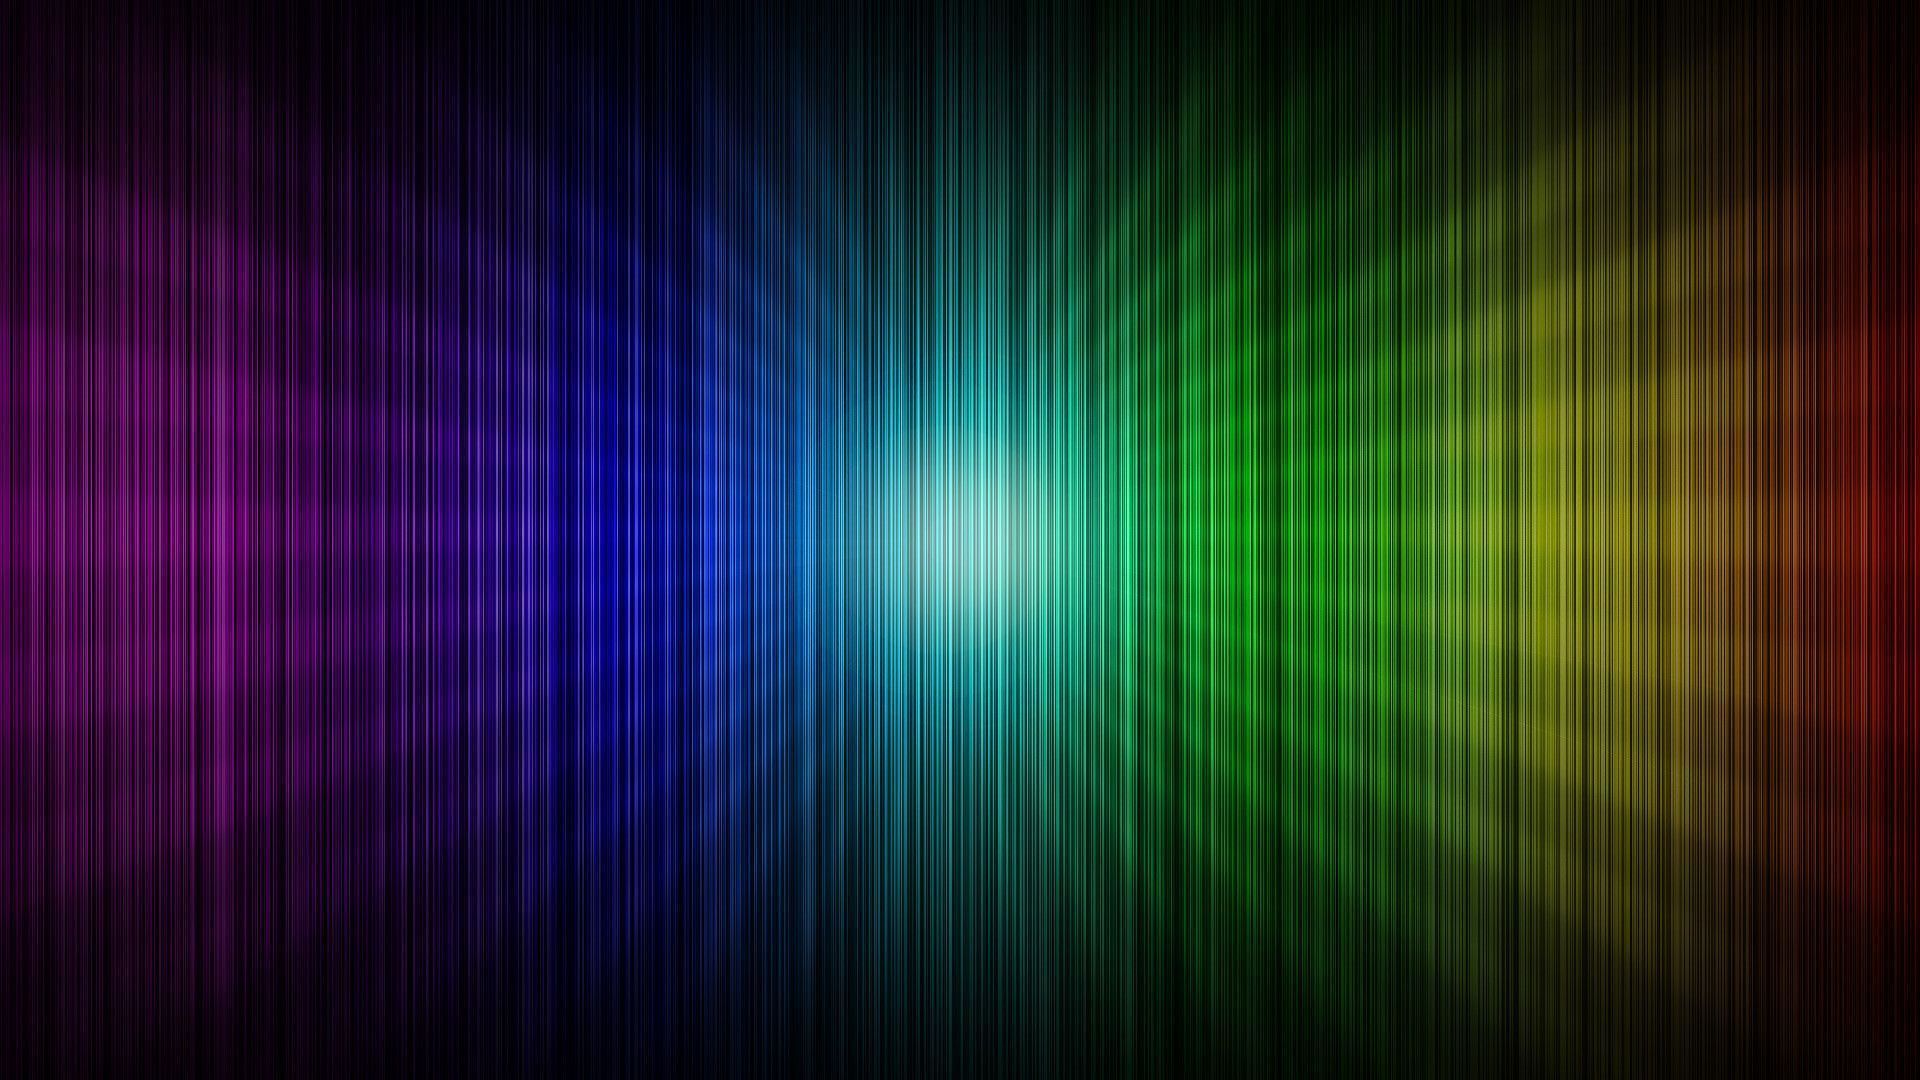 Cool Backgrounds wallpaper | 1920x1080 | #55625